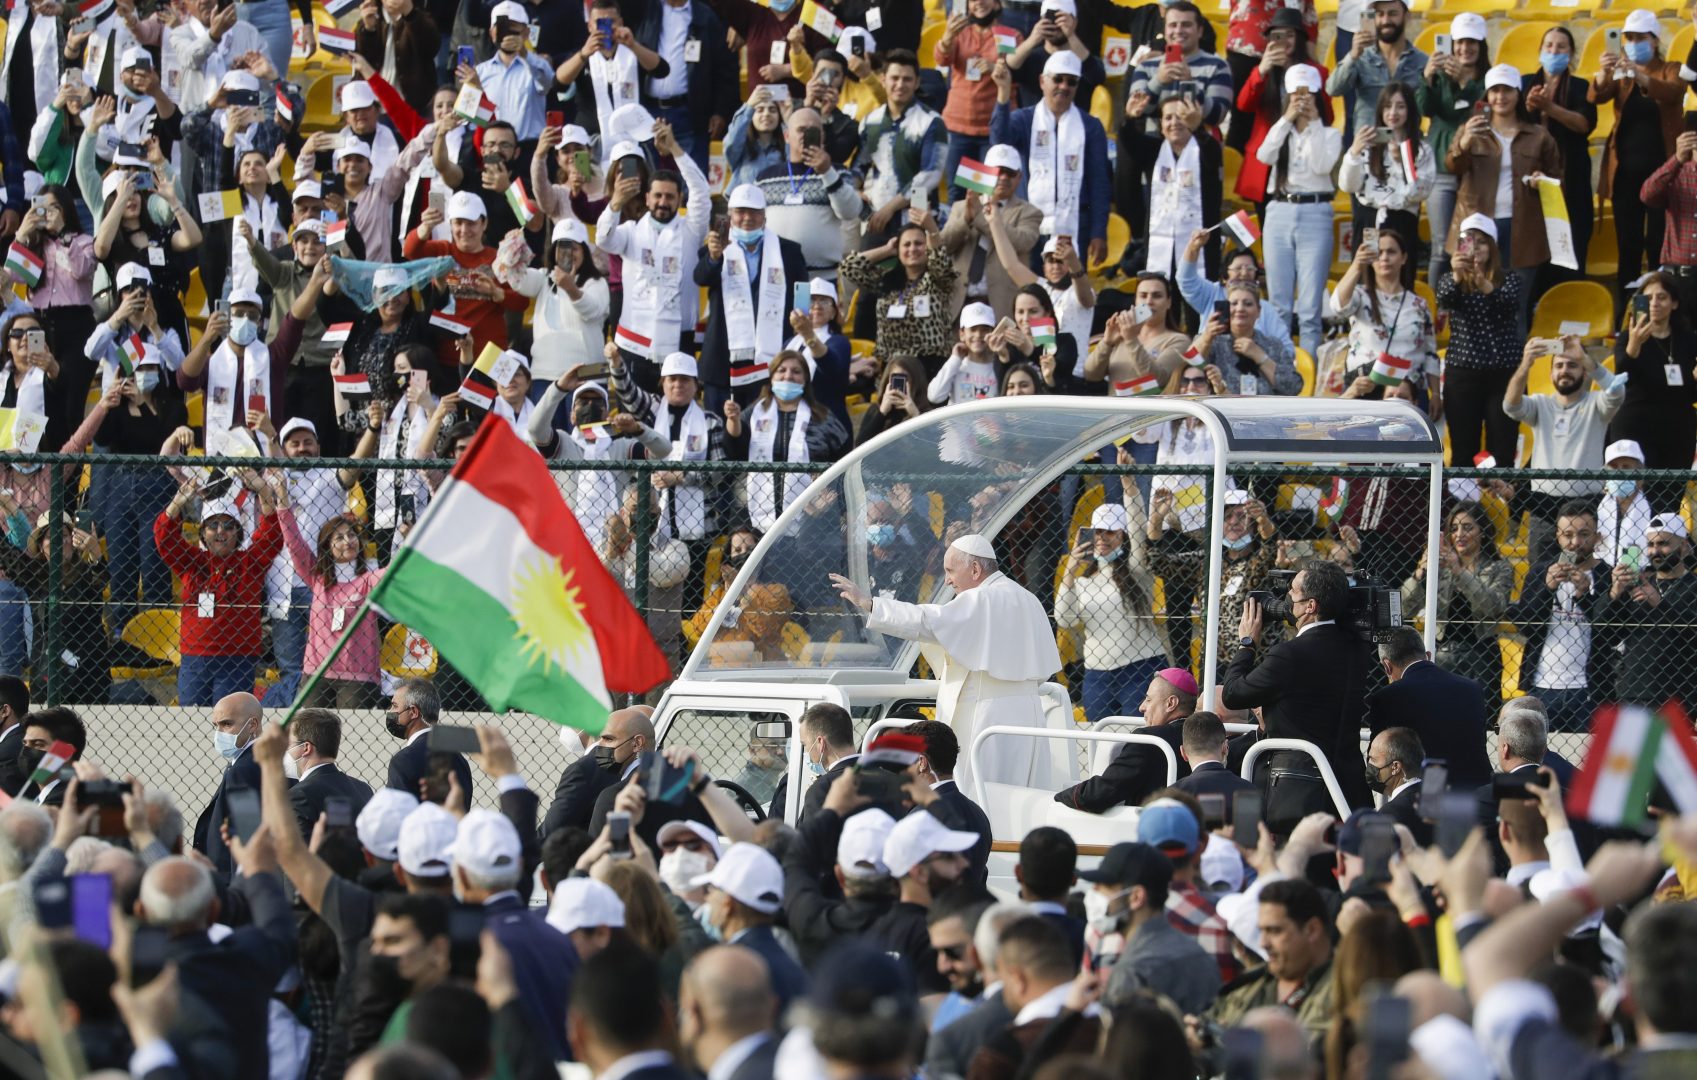 Pope Francis arrives on the popemobile to celebrate mass at the Franso Hariri Stadium in Irbil, Kurdistan Region of Iraq, Sunday, March 7, 2021. The Vatican and the pope have frequently insisted on the need to preserve Iraq's ancient Christian communities and create the security, economic and social conditions for those who have left to return.(AP Photo/Andrew Medichini)